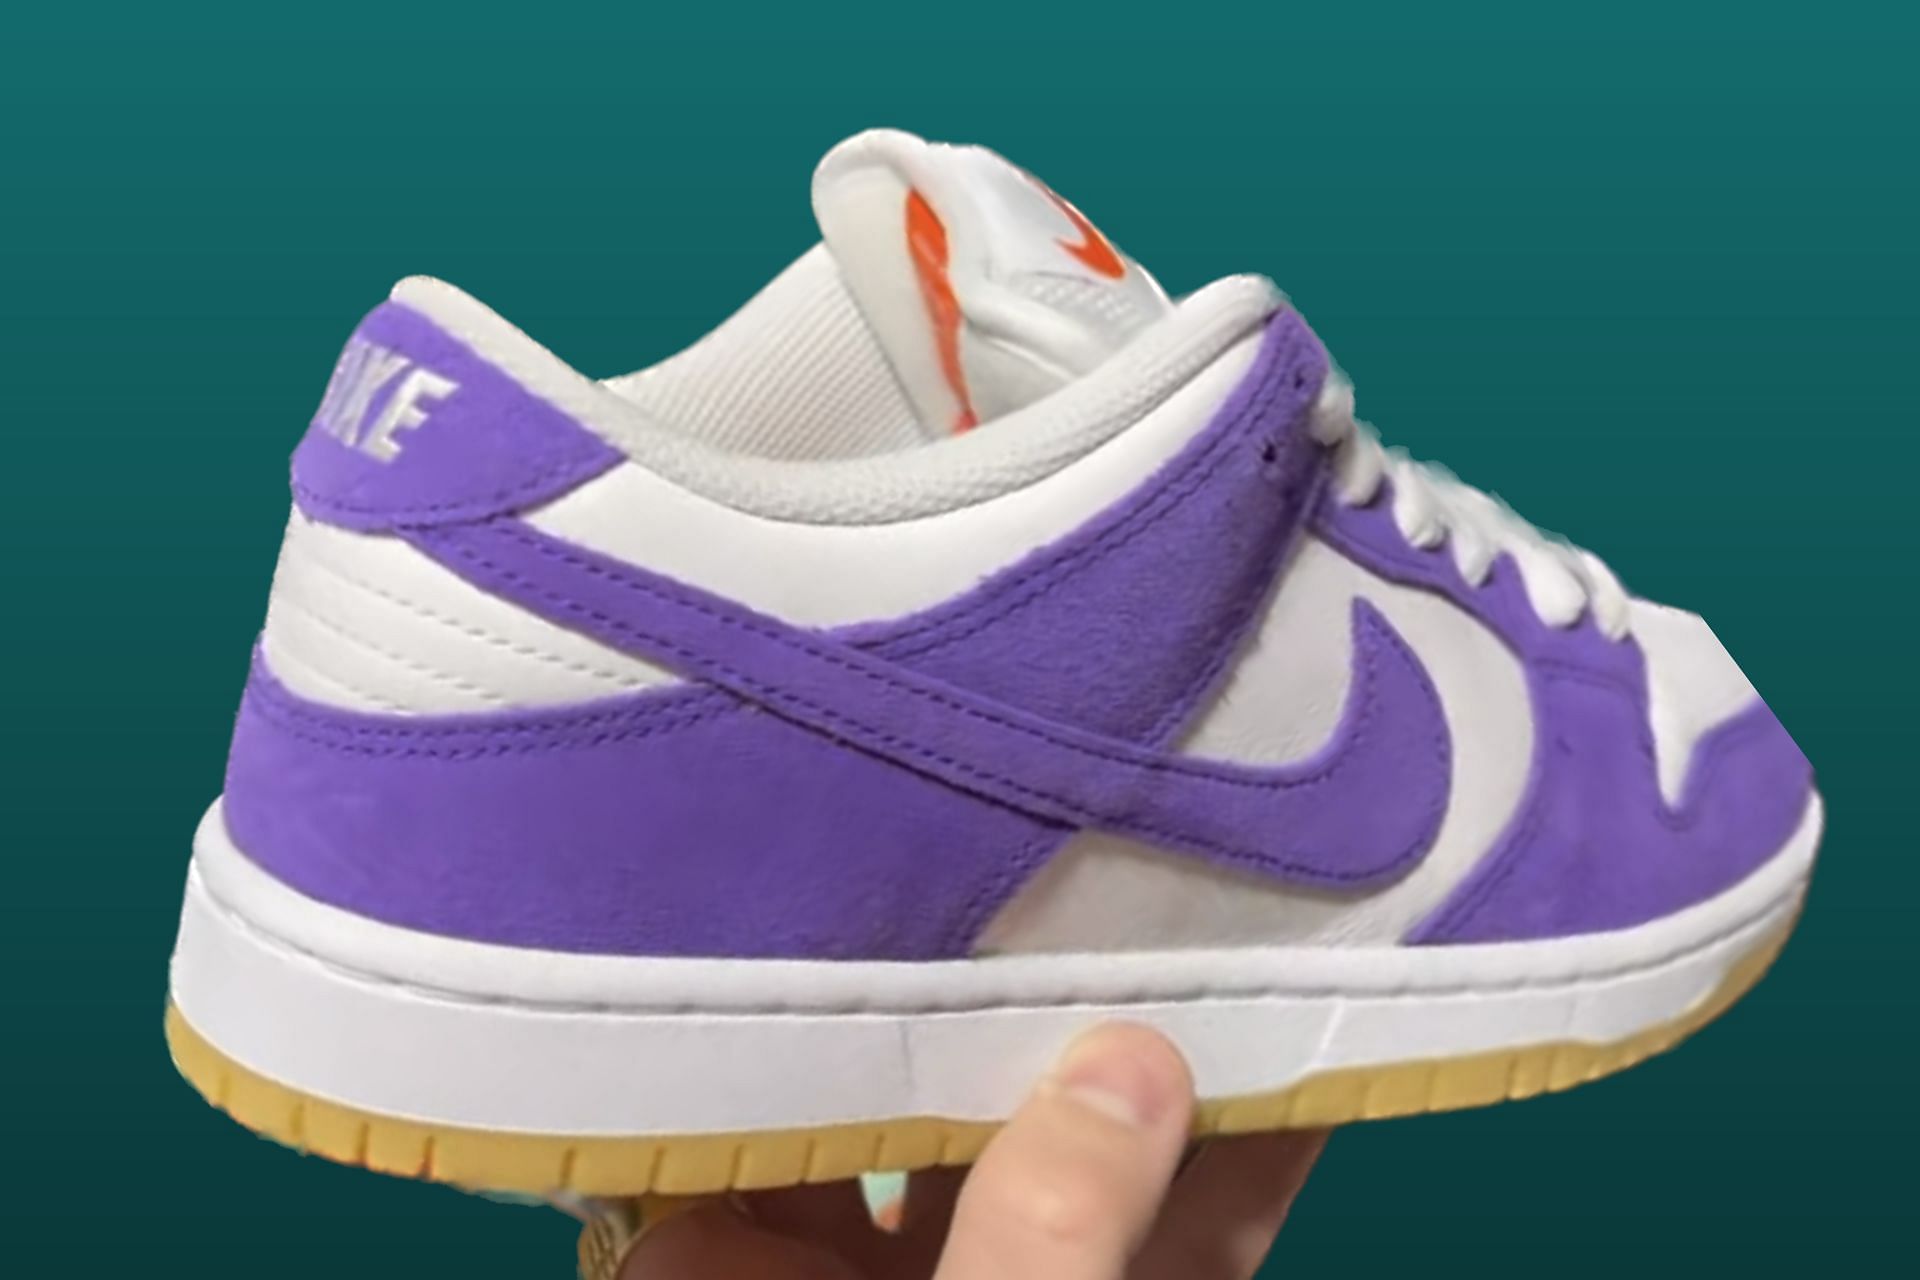 Nike SB Dunk Low “Court Purple Gum” shoes: Where to buy, price 